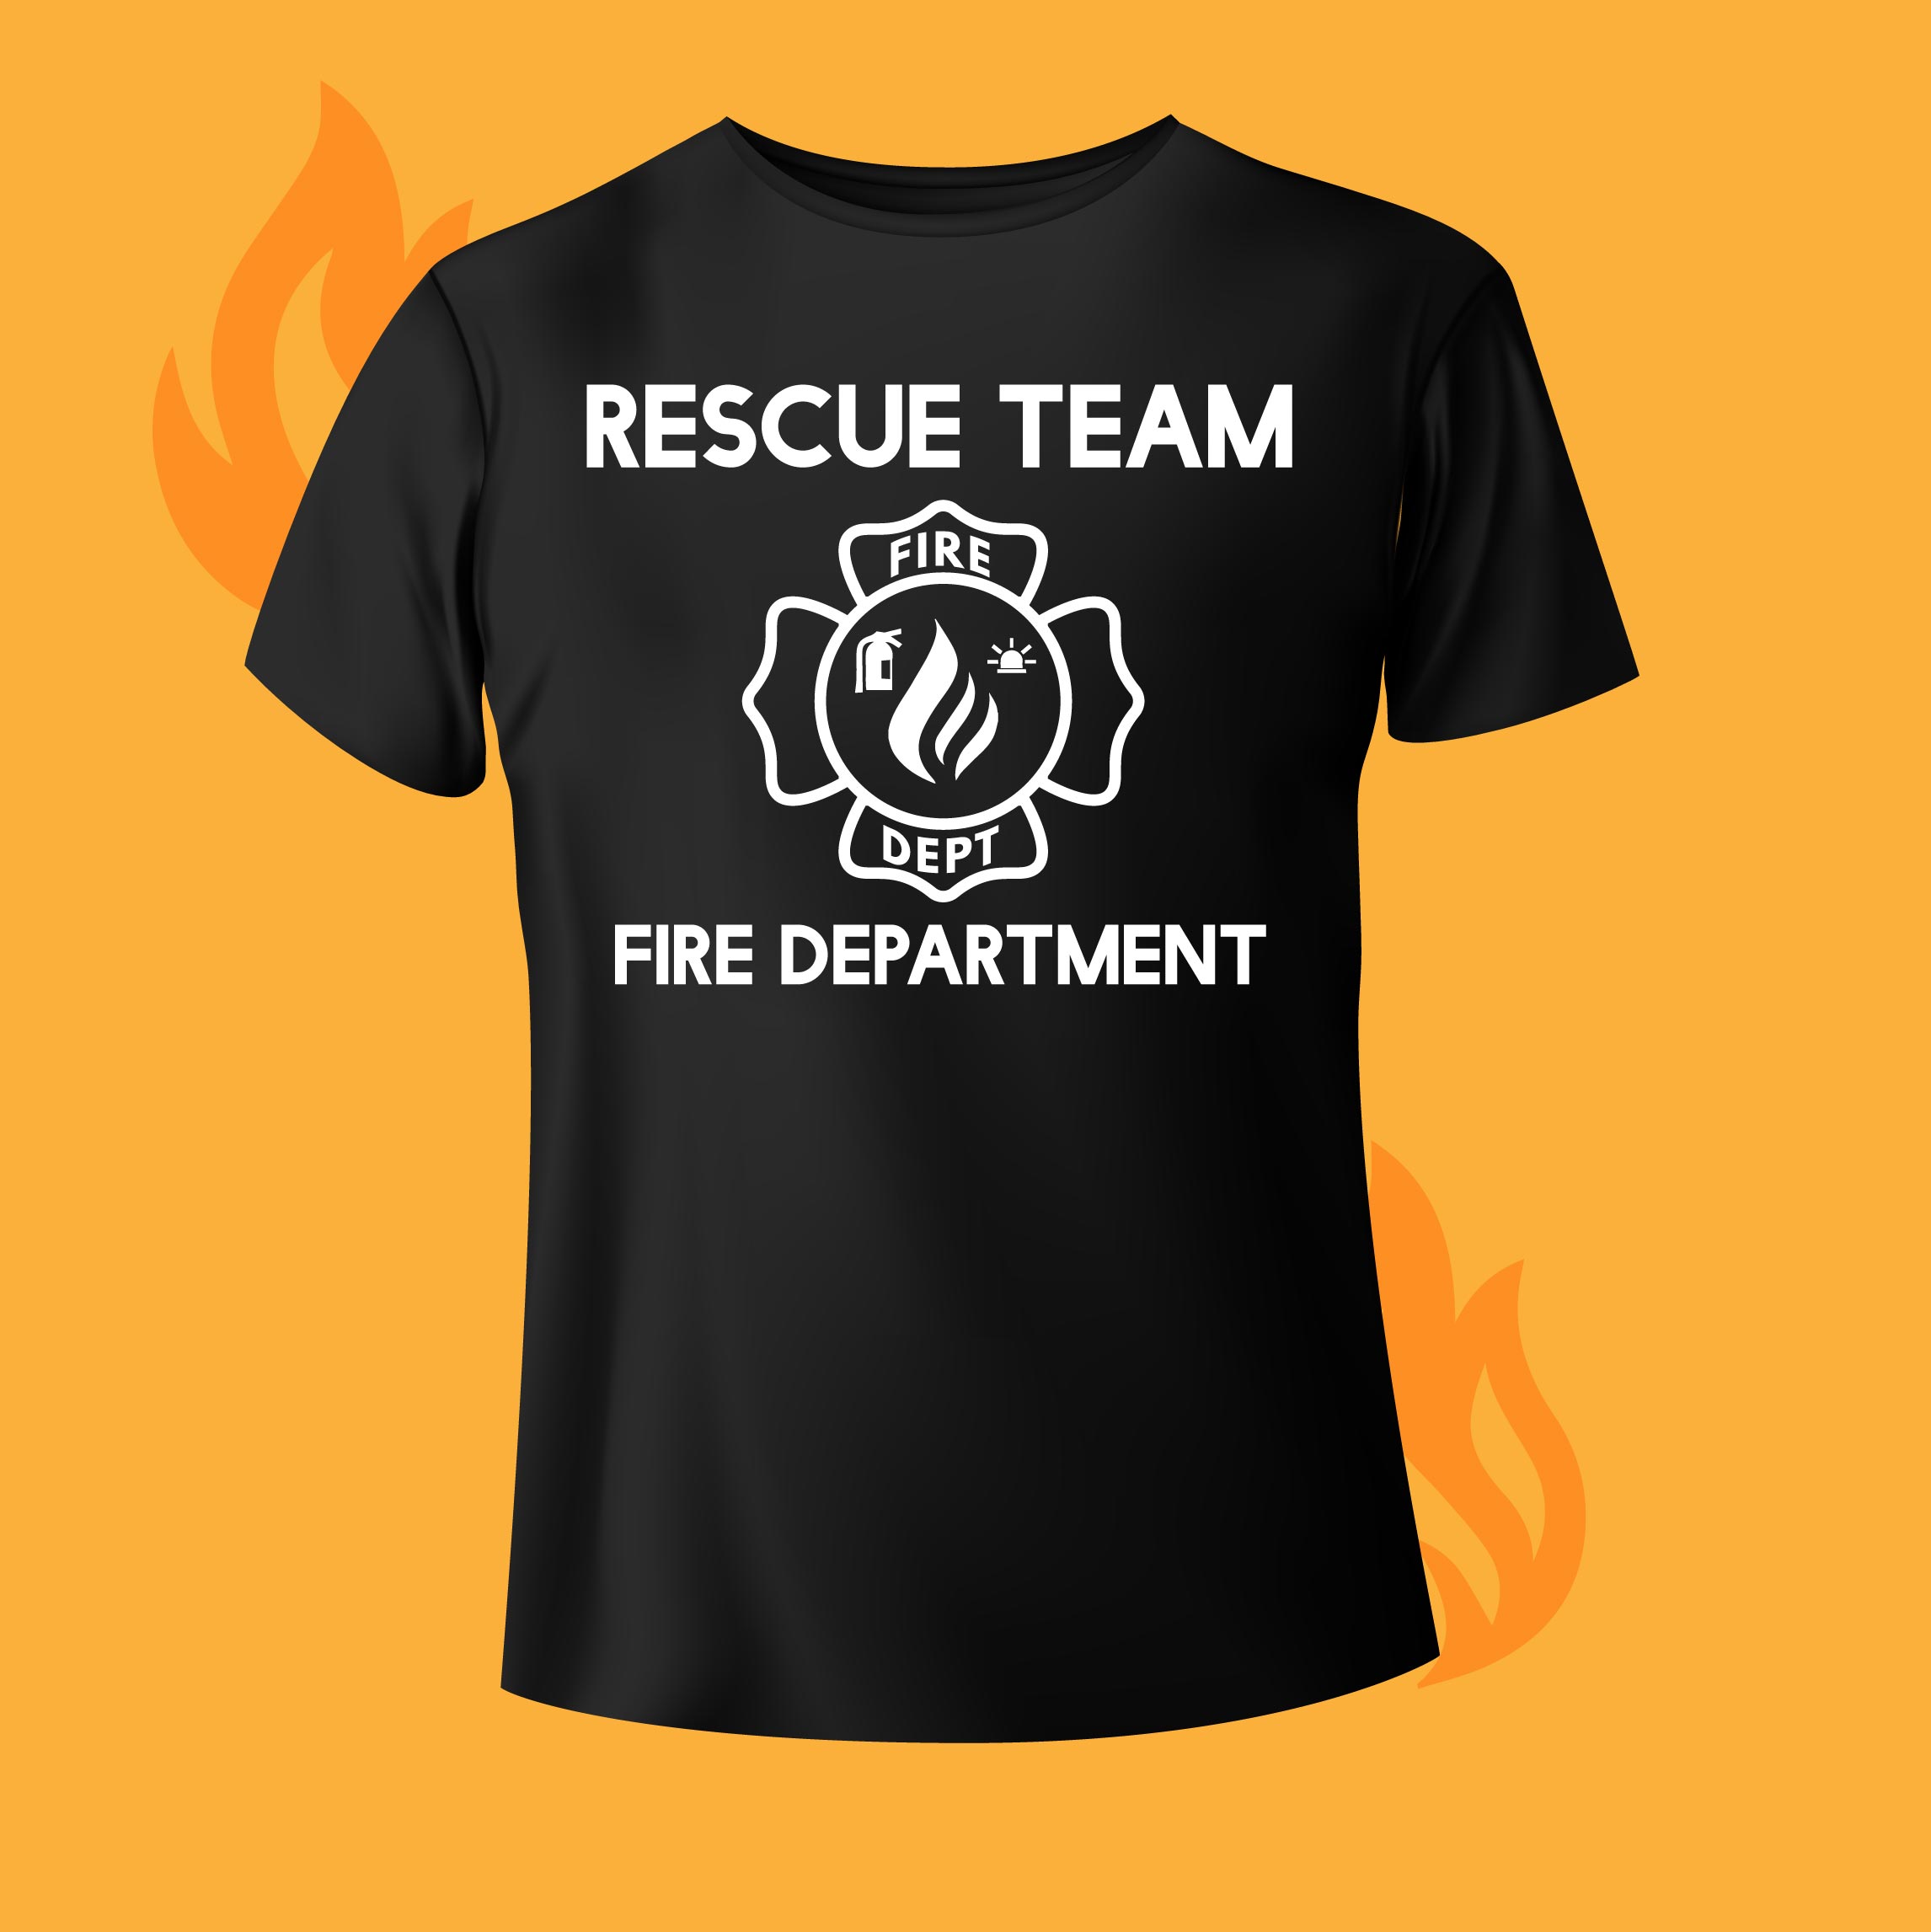 T - shirt that says rescue team fire department.